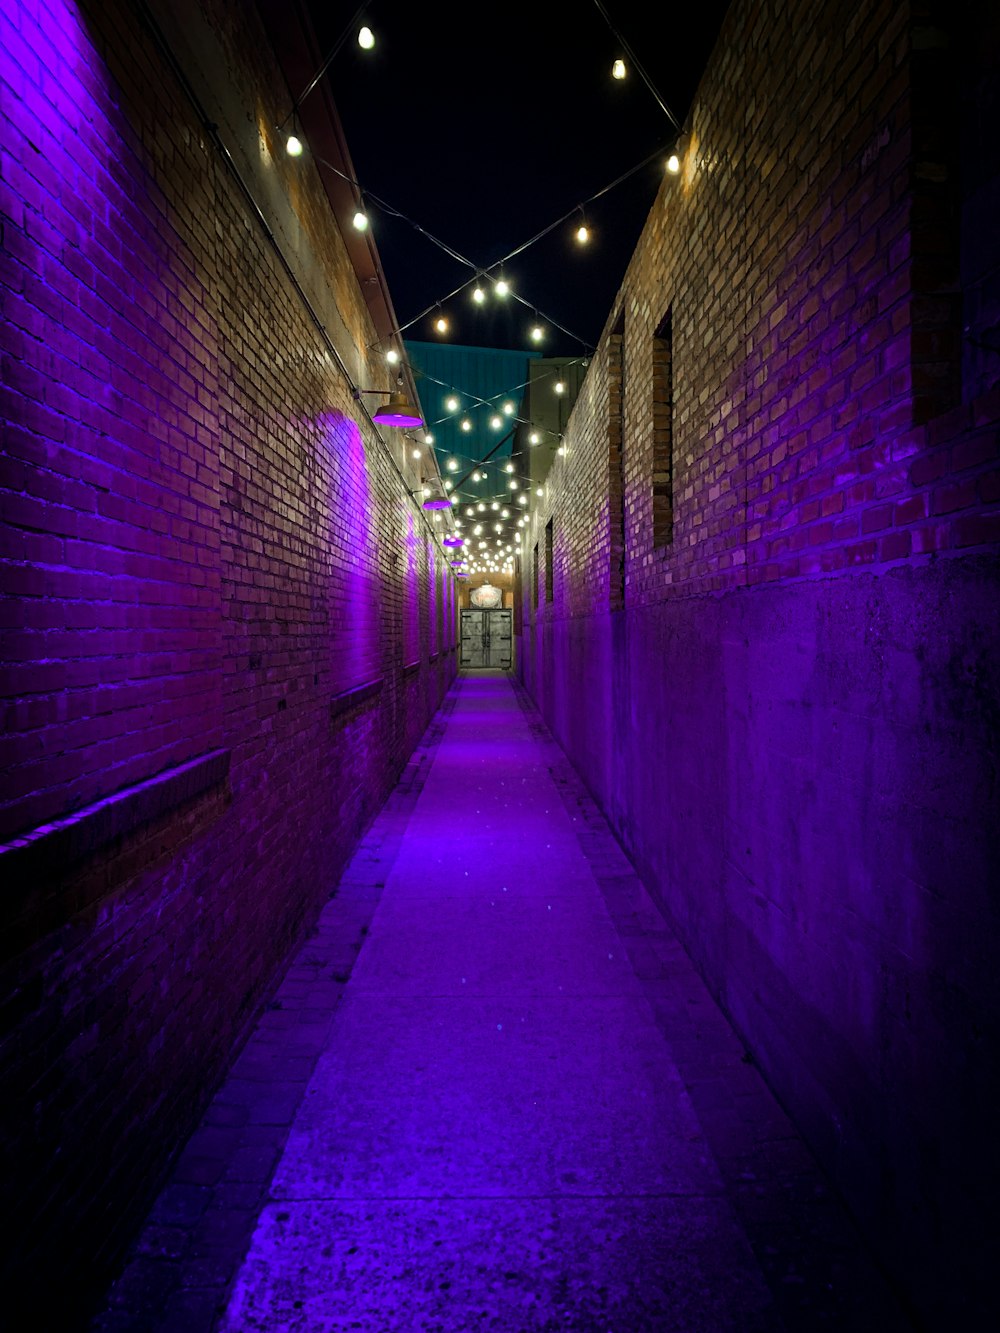 a long narrow alley with purple lights on the walls